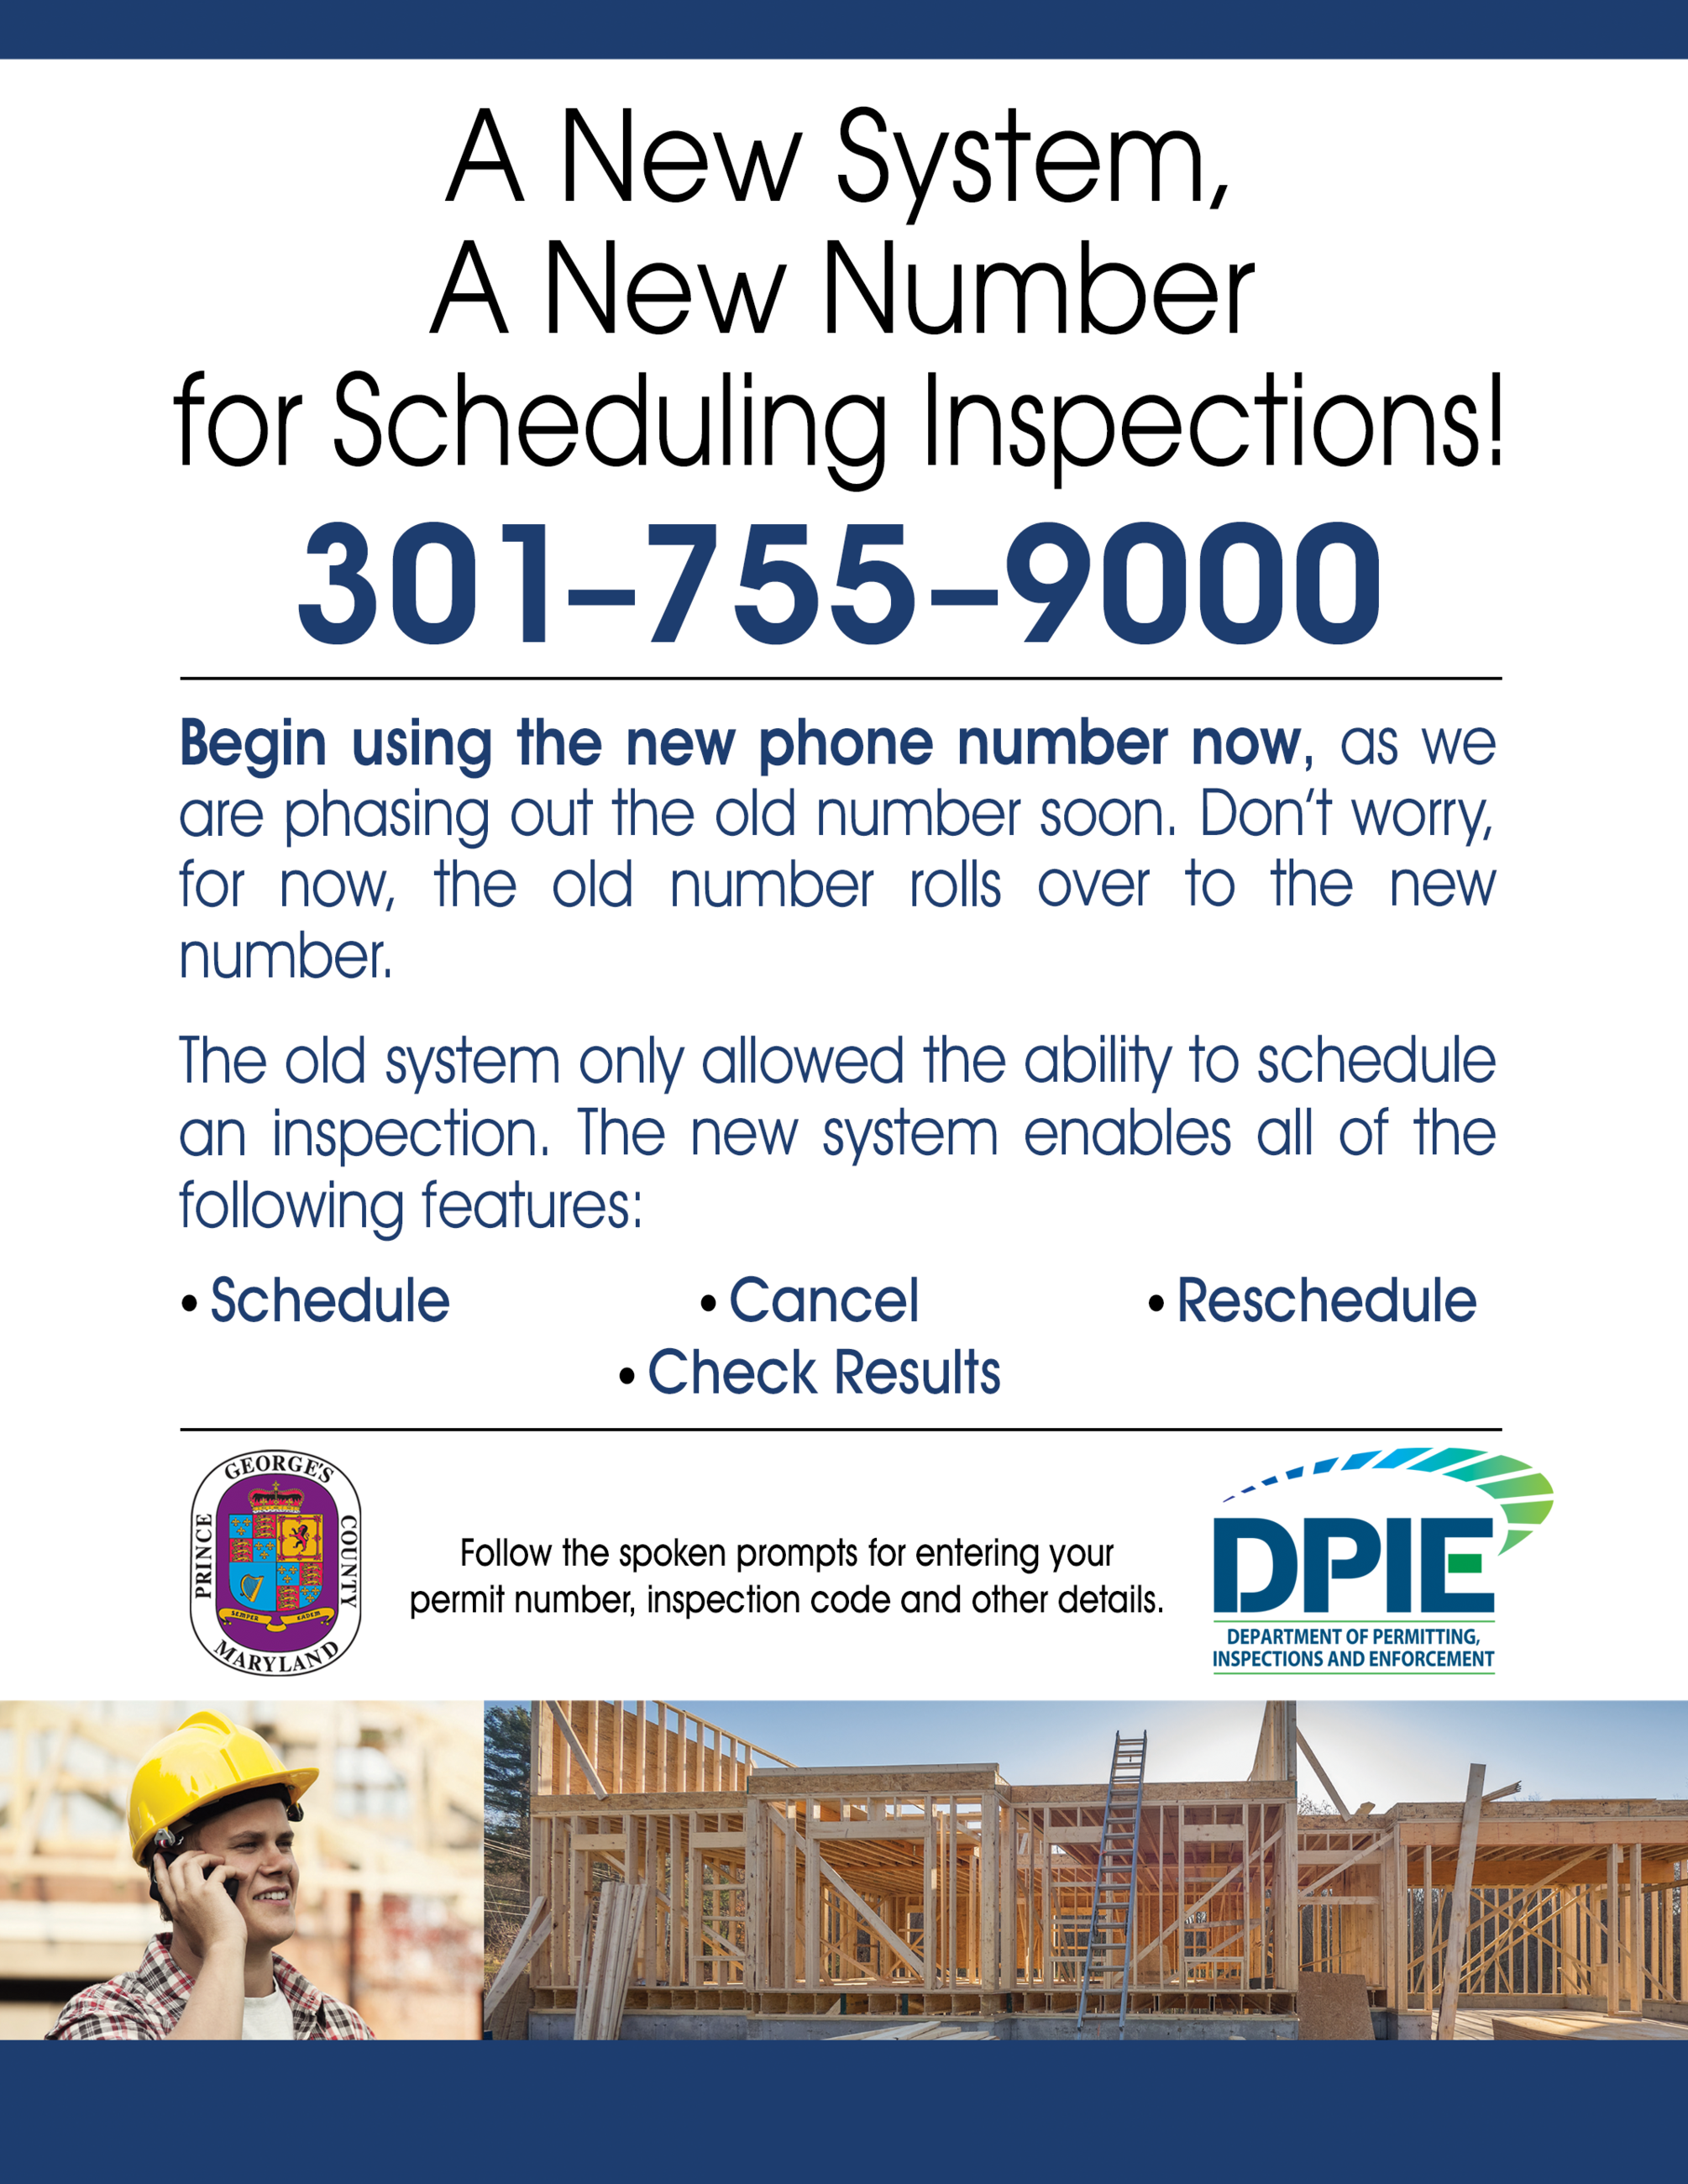 NEW Inspections Number to Schedule an Inspection, pics of work on phone and framing of bldg